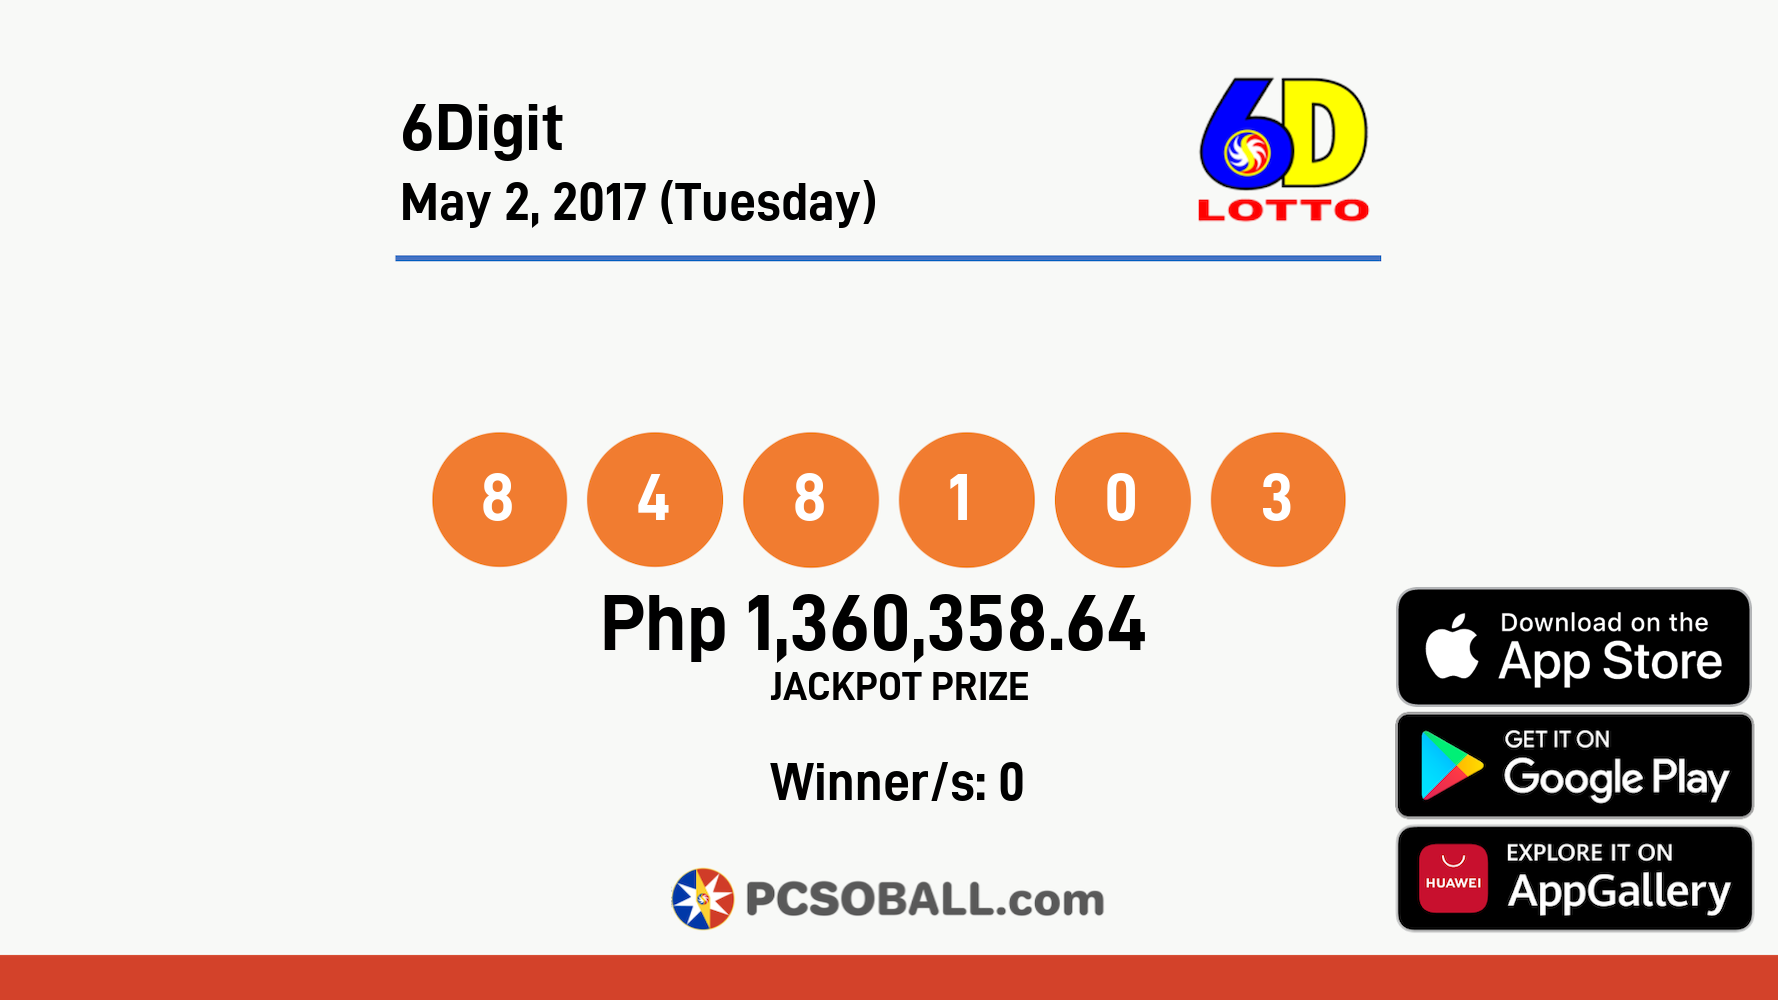 6Digit May 2, 2017 (Tuesday) Result